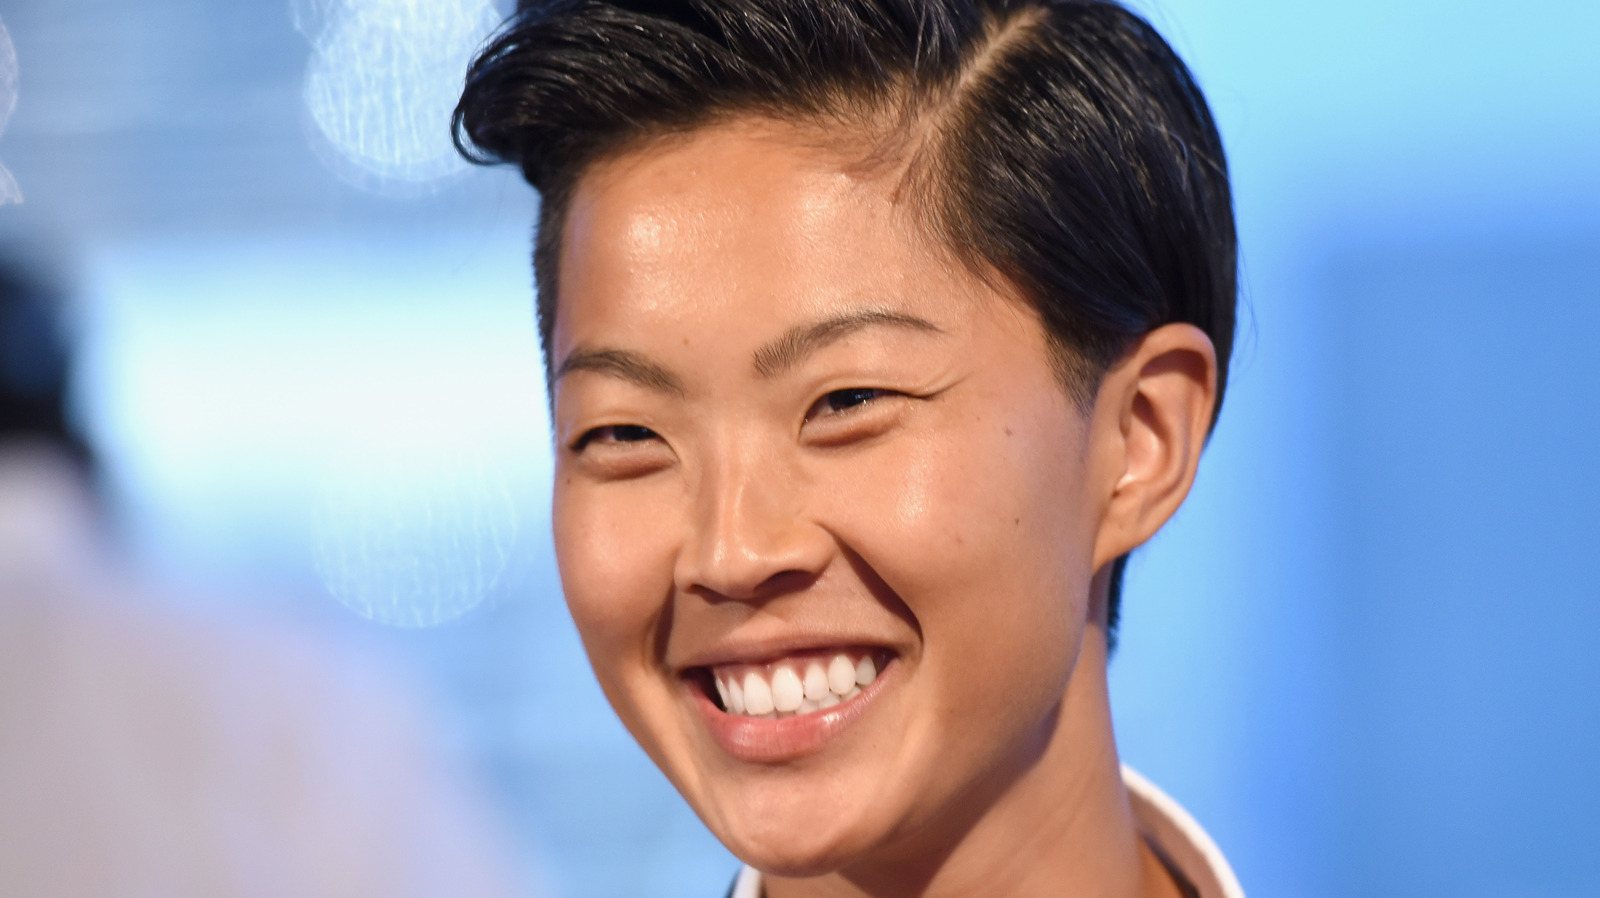 What Some Of Kristen Kish's Tattoos Really Mean